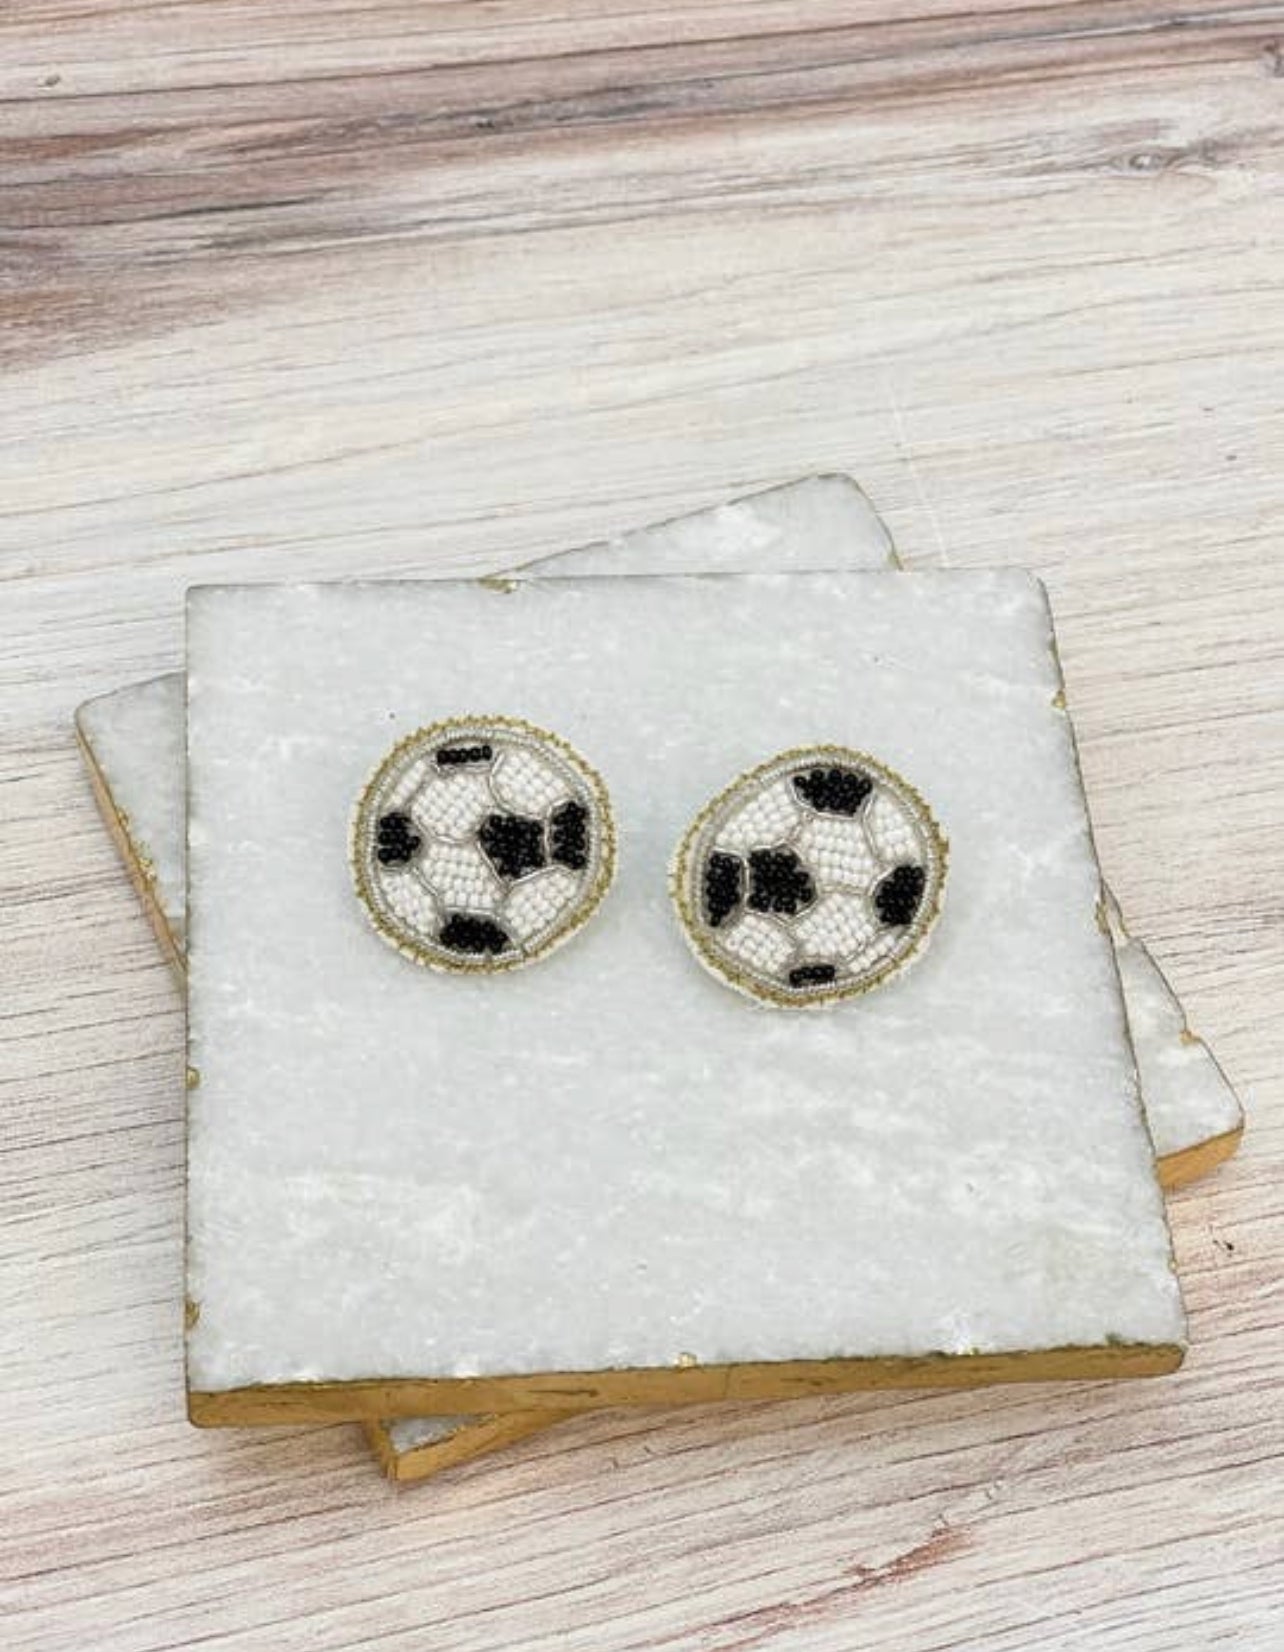 SOCCER BALL STUD EARRINGS - Baby Bums Clothing 